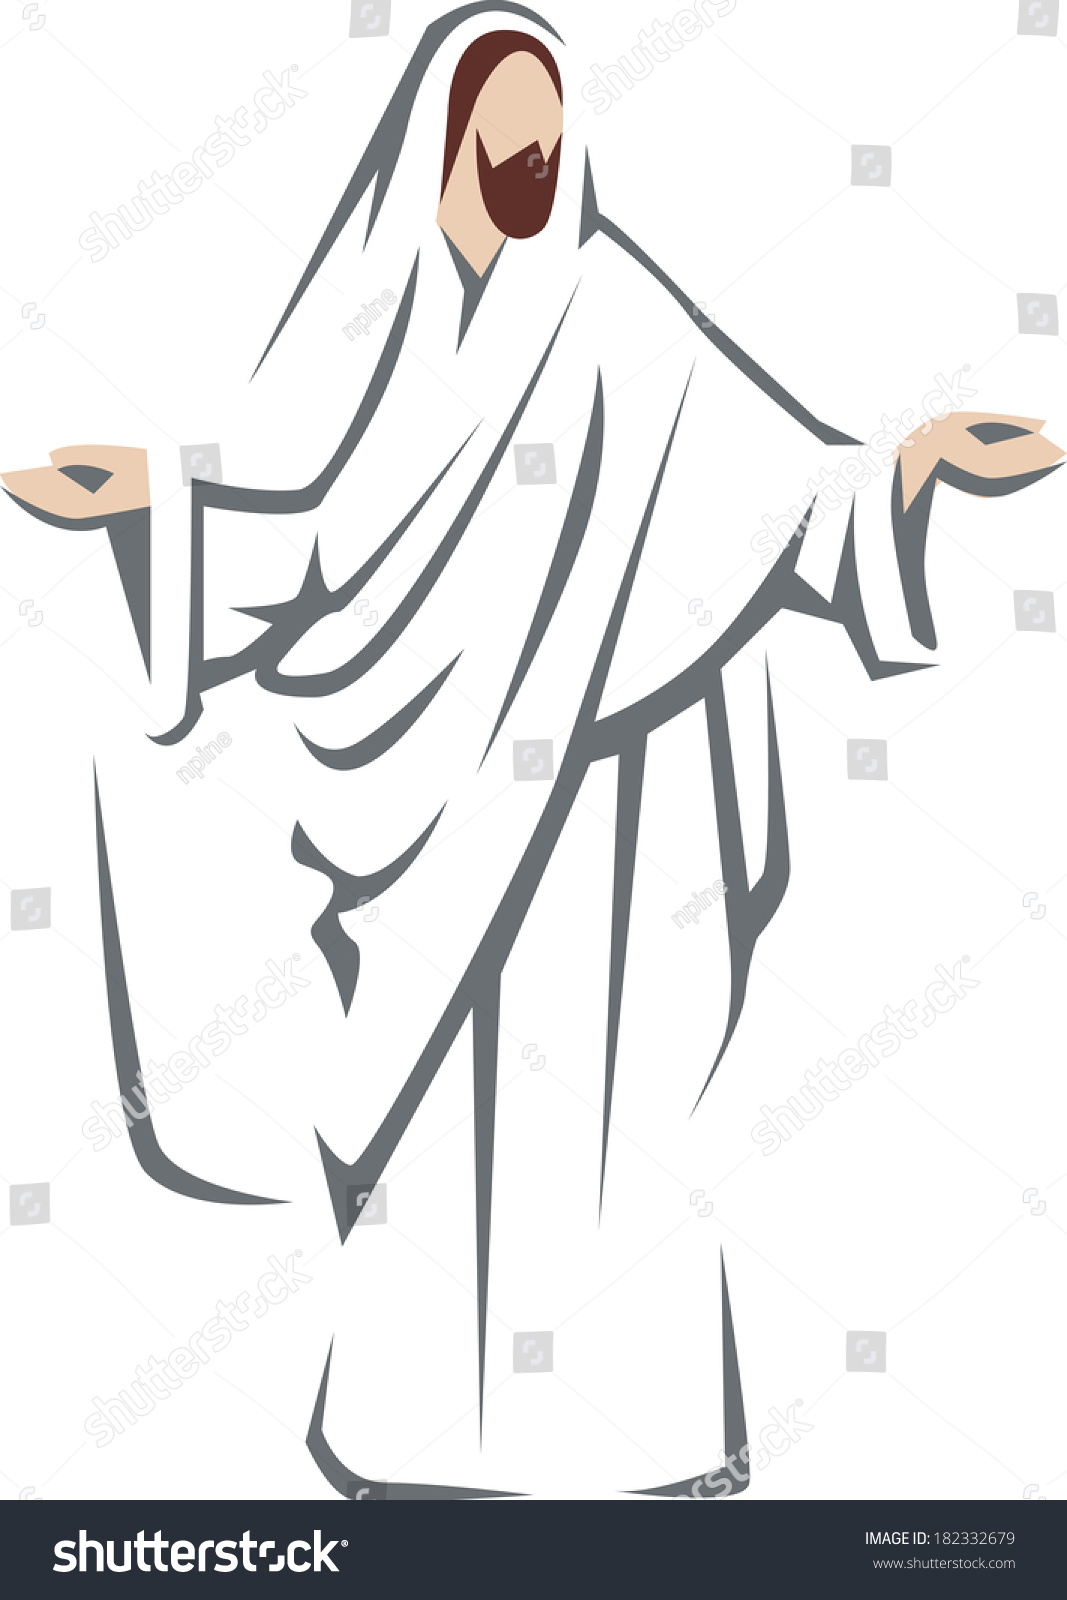 clipart of jesus with outstretched arms - photo #24